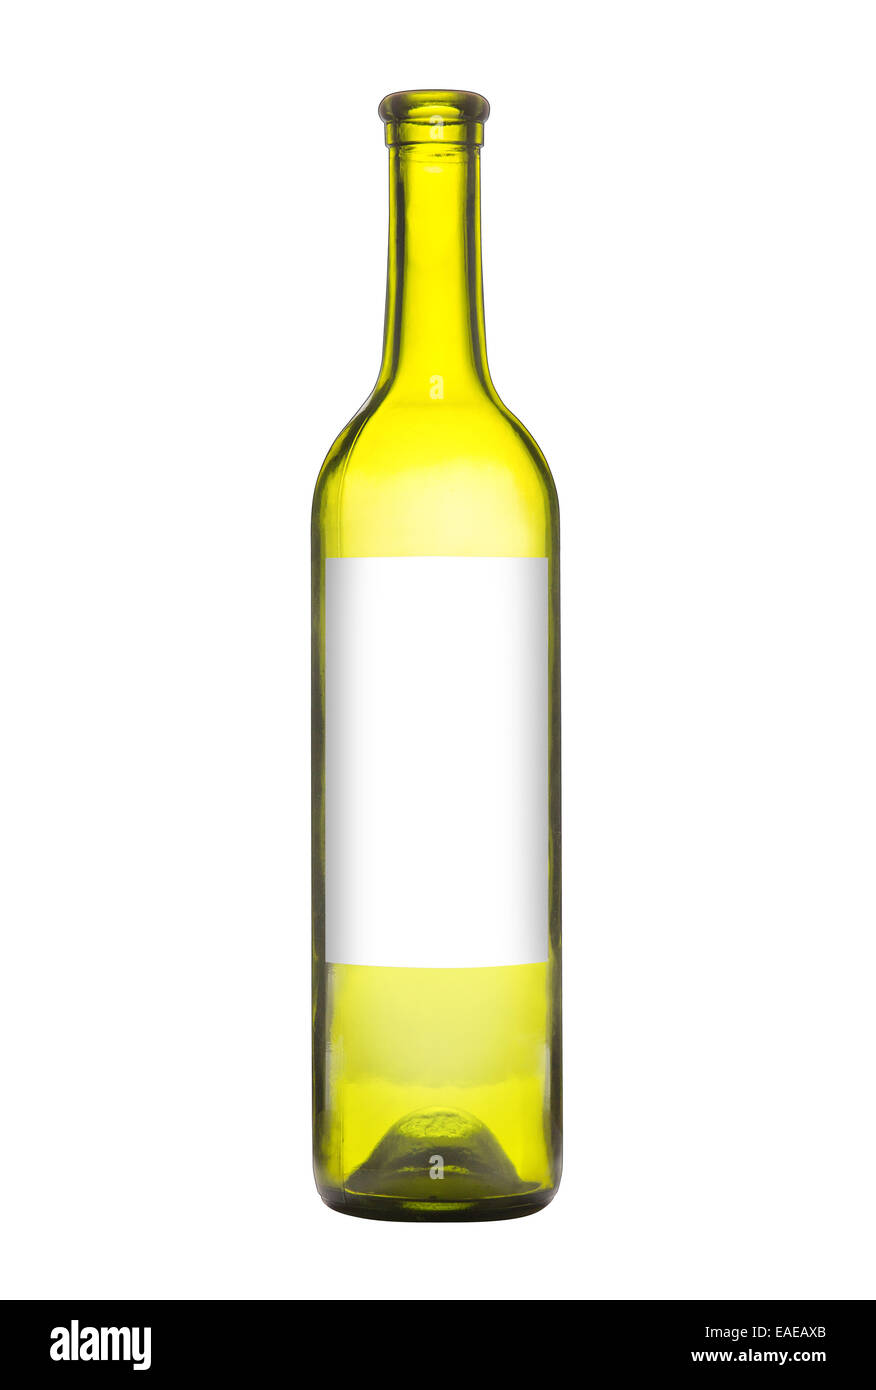 wine bottle isolated on white copy space panel Stock Photo